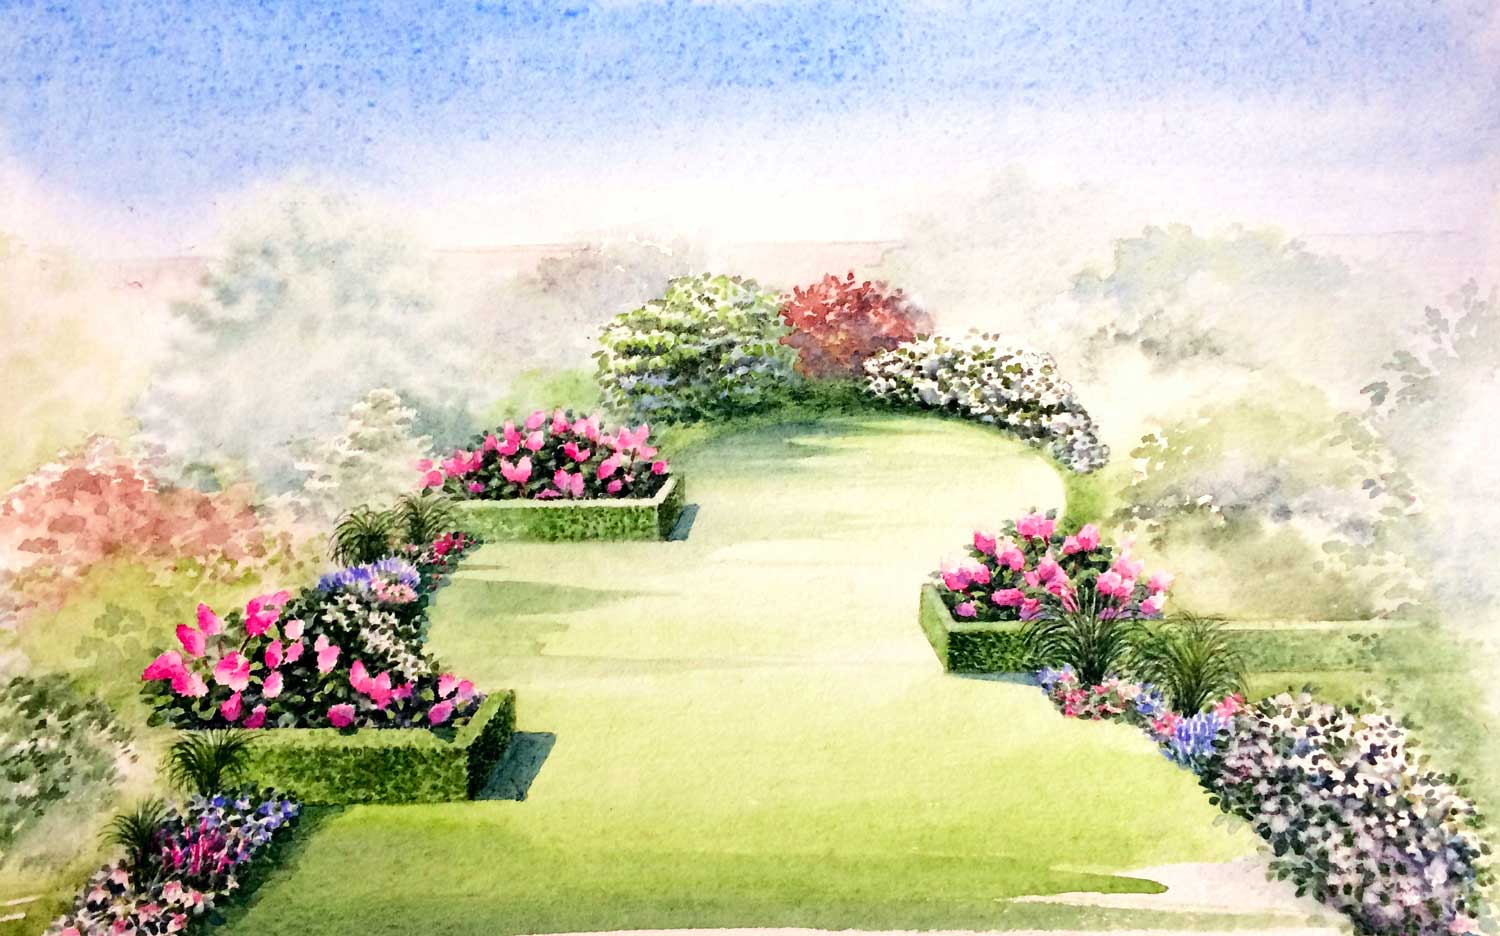 Watercolour of a French garden by Noelle Le Guillouzic